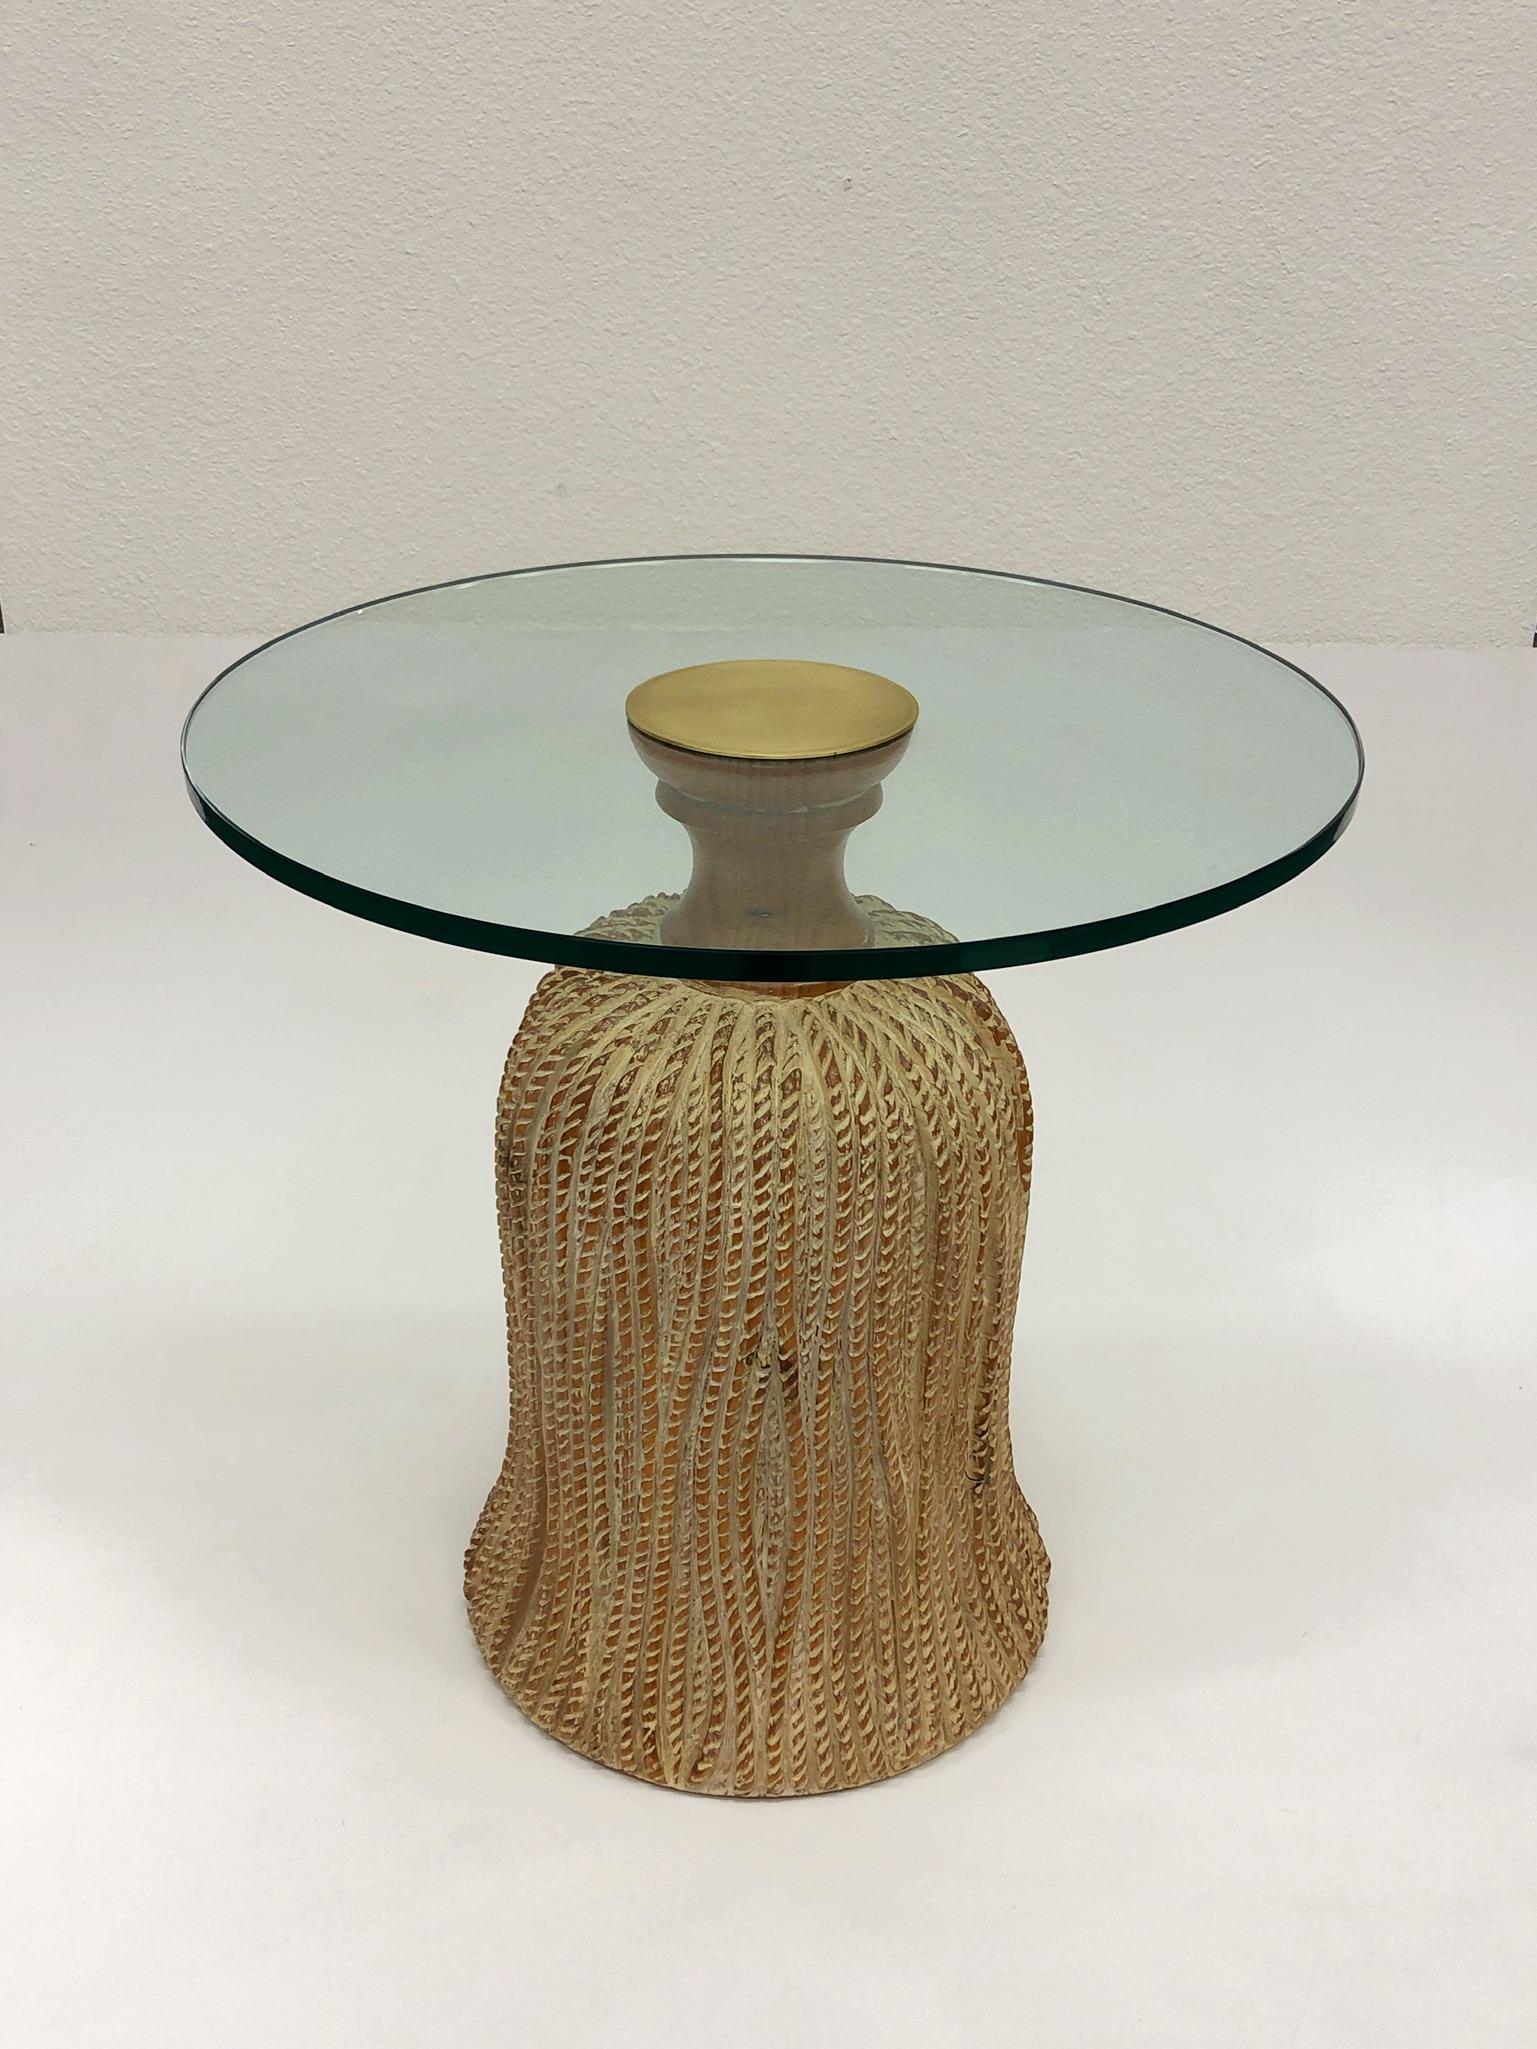 A glamorous 1970s Spanish carved wood tassel side table design by Sarreid Ltd.
the table base is solid pinewood with a new 1/2” thick glass top, a satin brass cap attaches the top to the base.
Dimensions: 20” diameter 19.75” high.